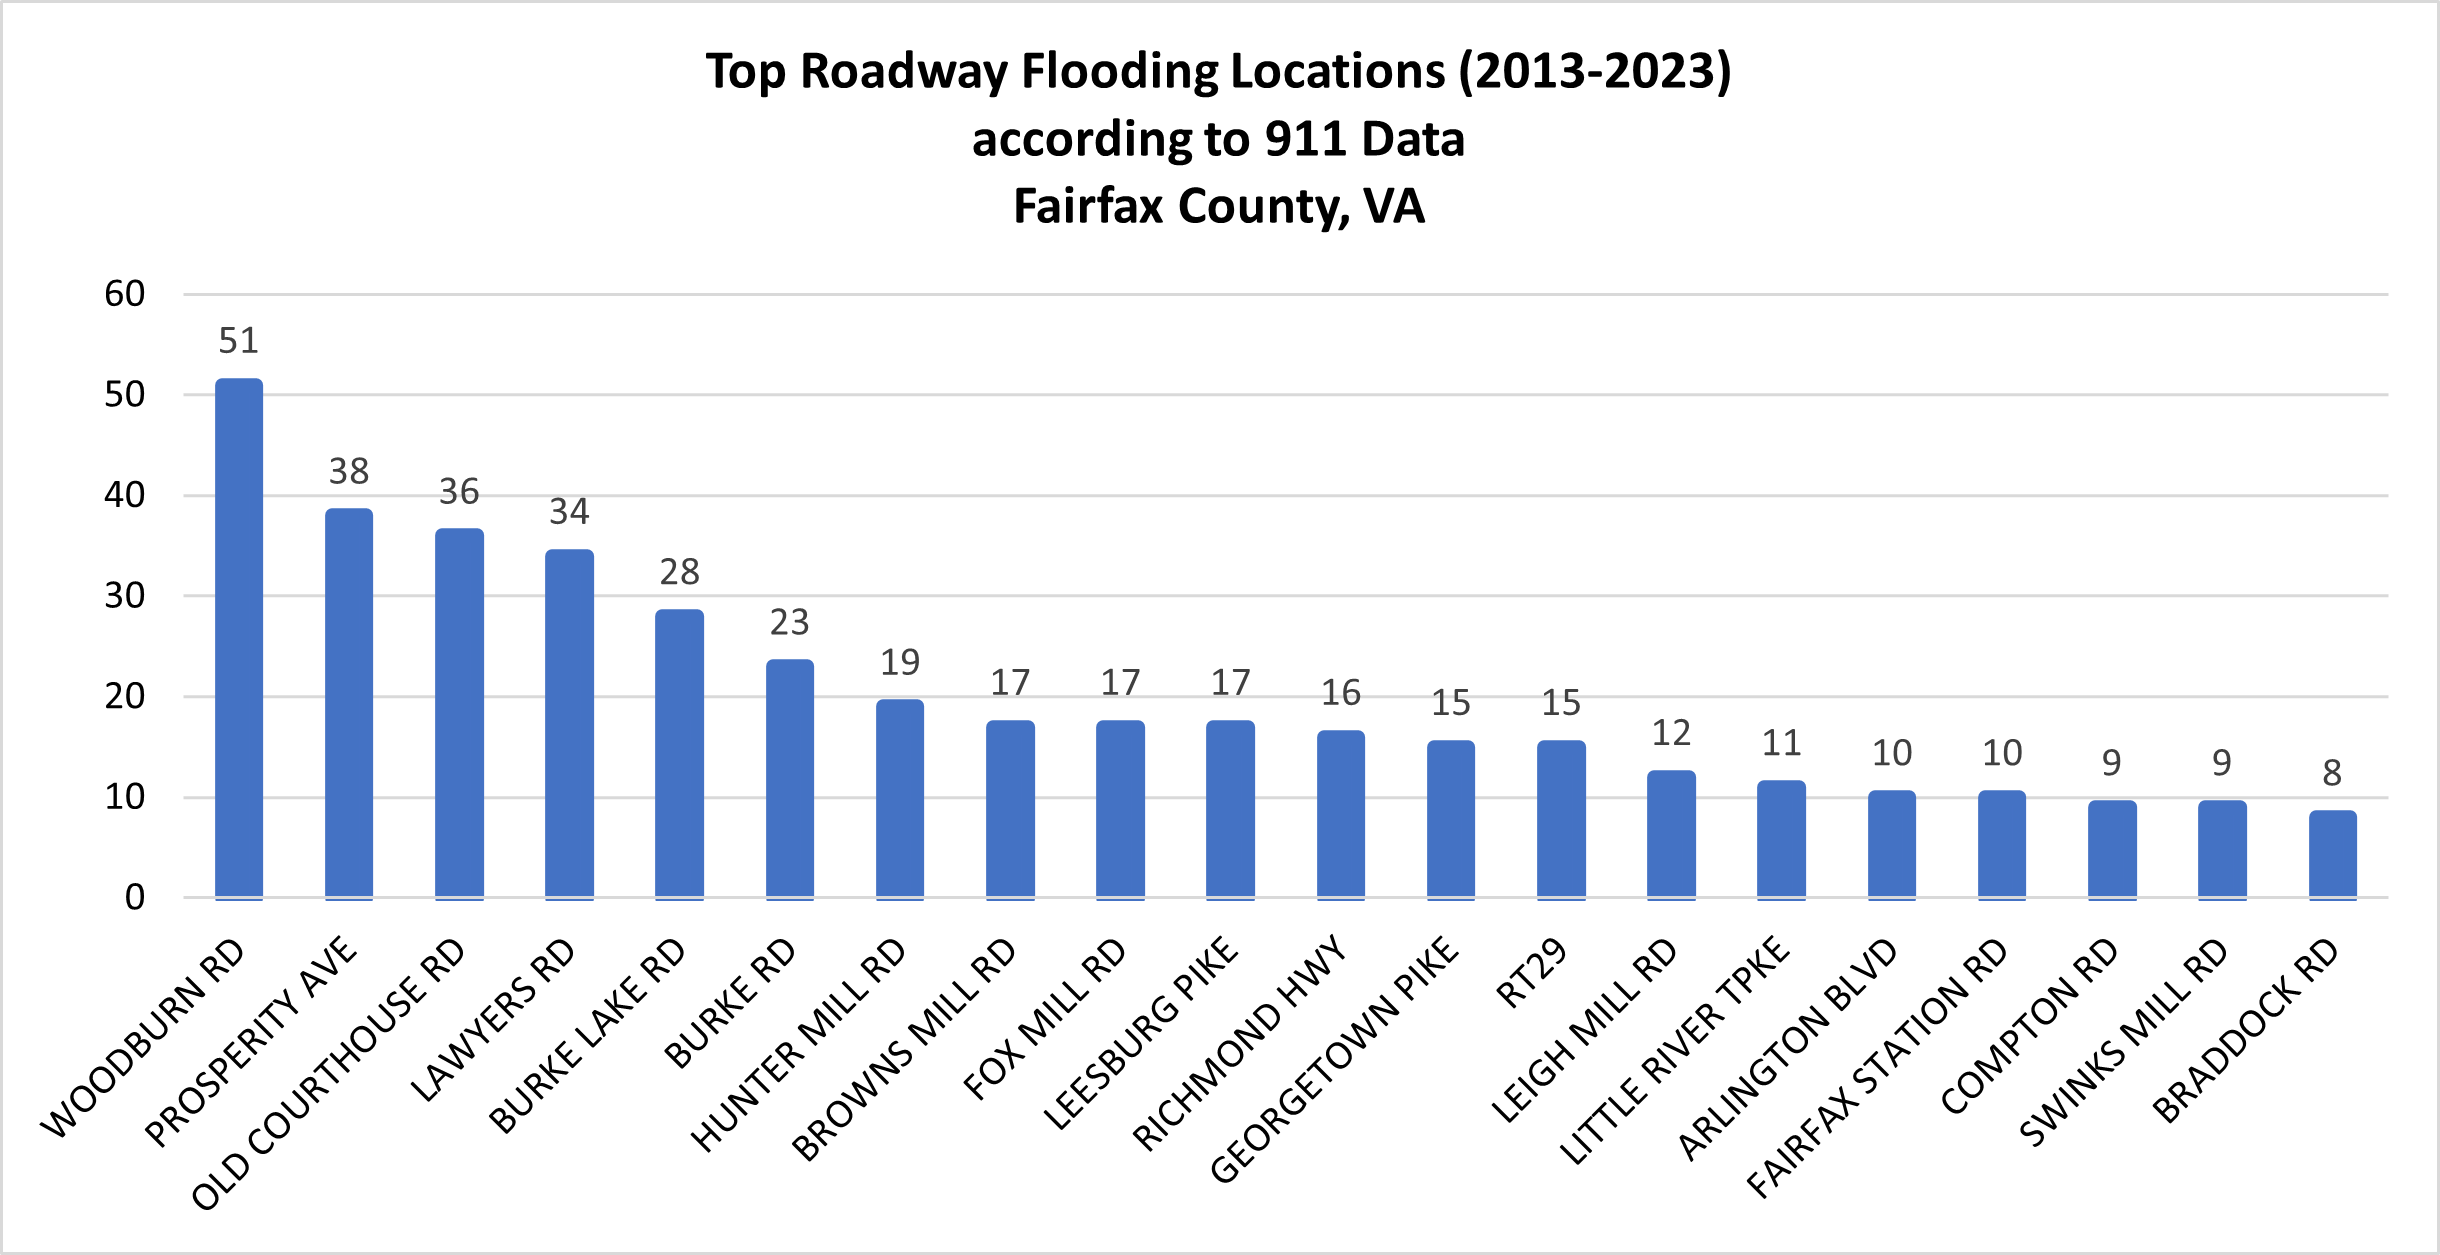 top roadway flooding locations from 2013 to 2023 according to 911 data